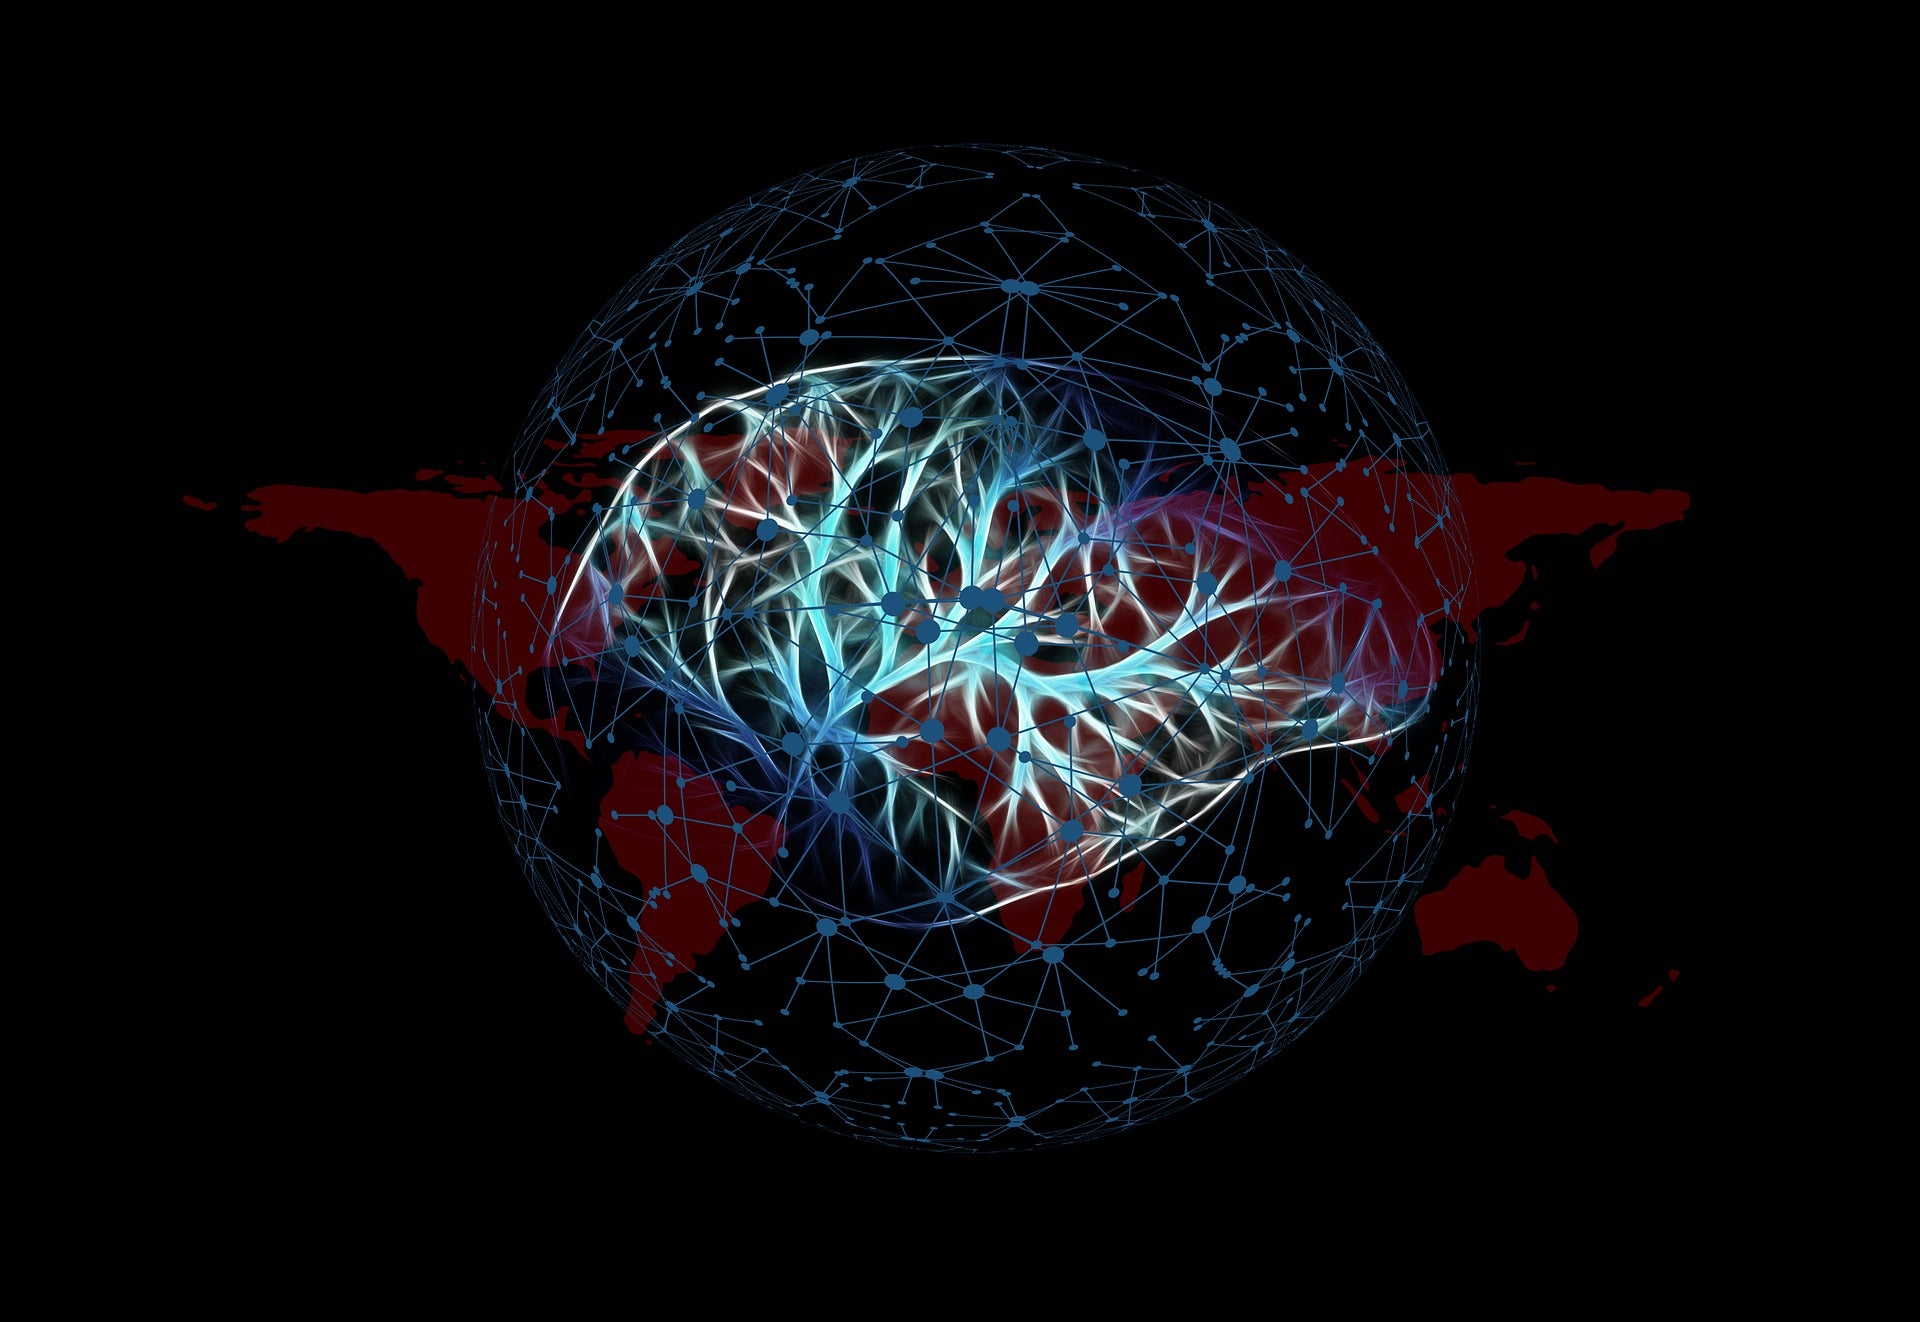 Brain structures with a black background showing information networks and the continents